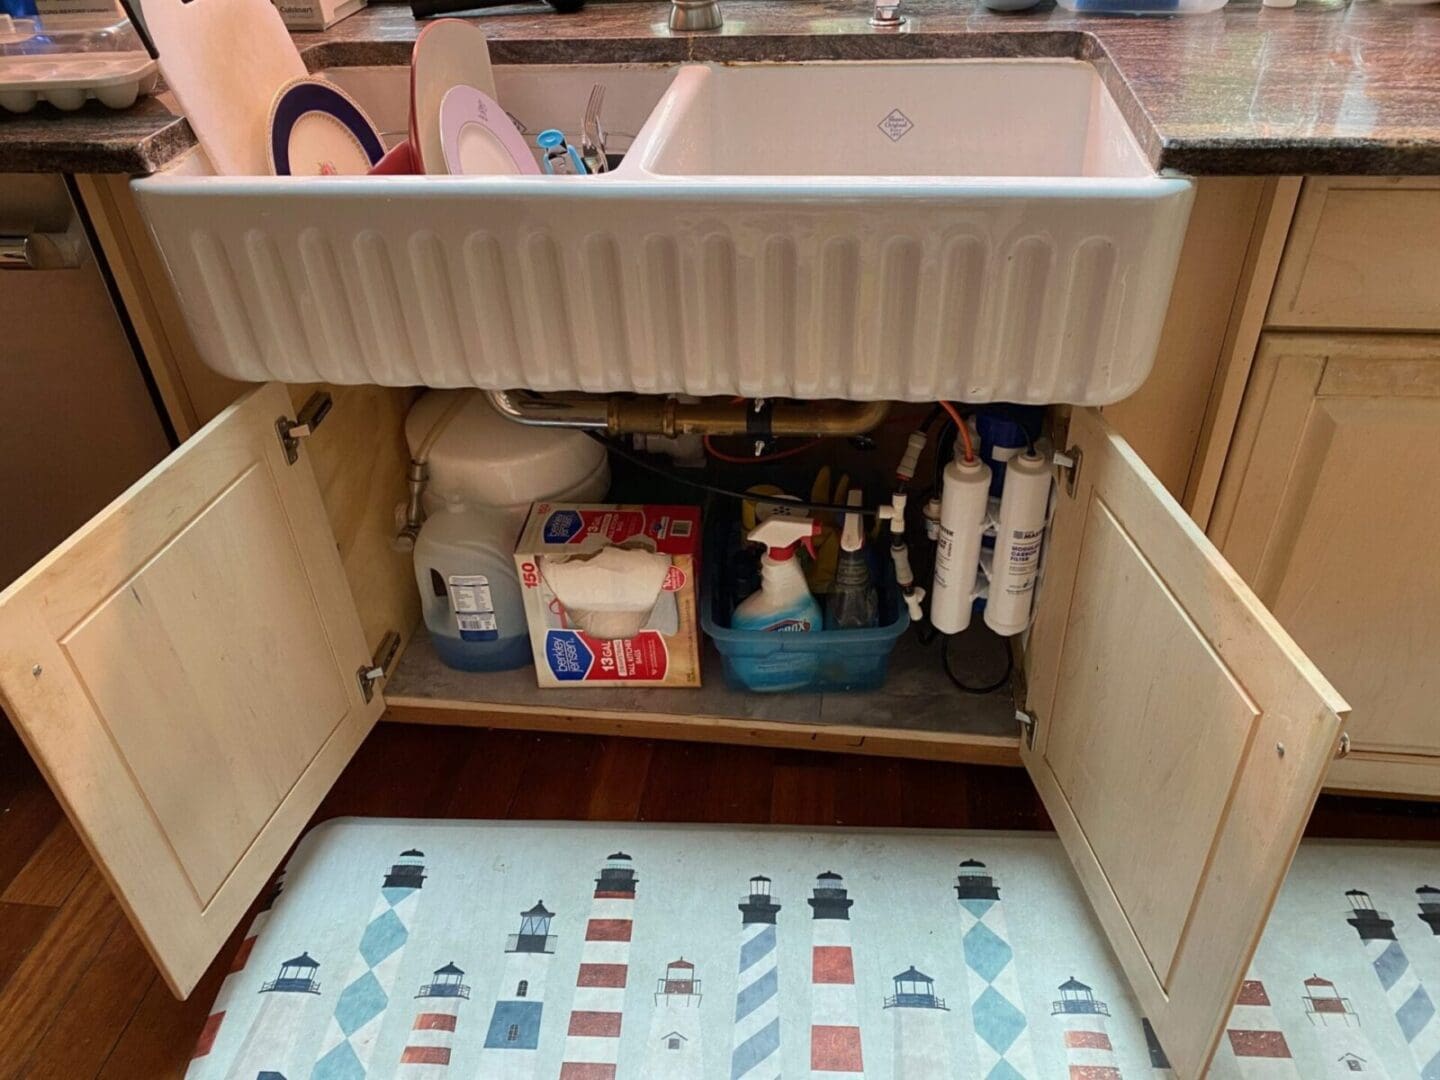 A kitchen with a sink under a rug.